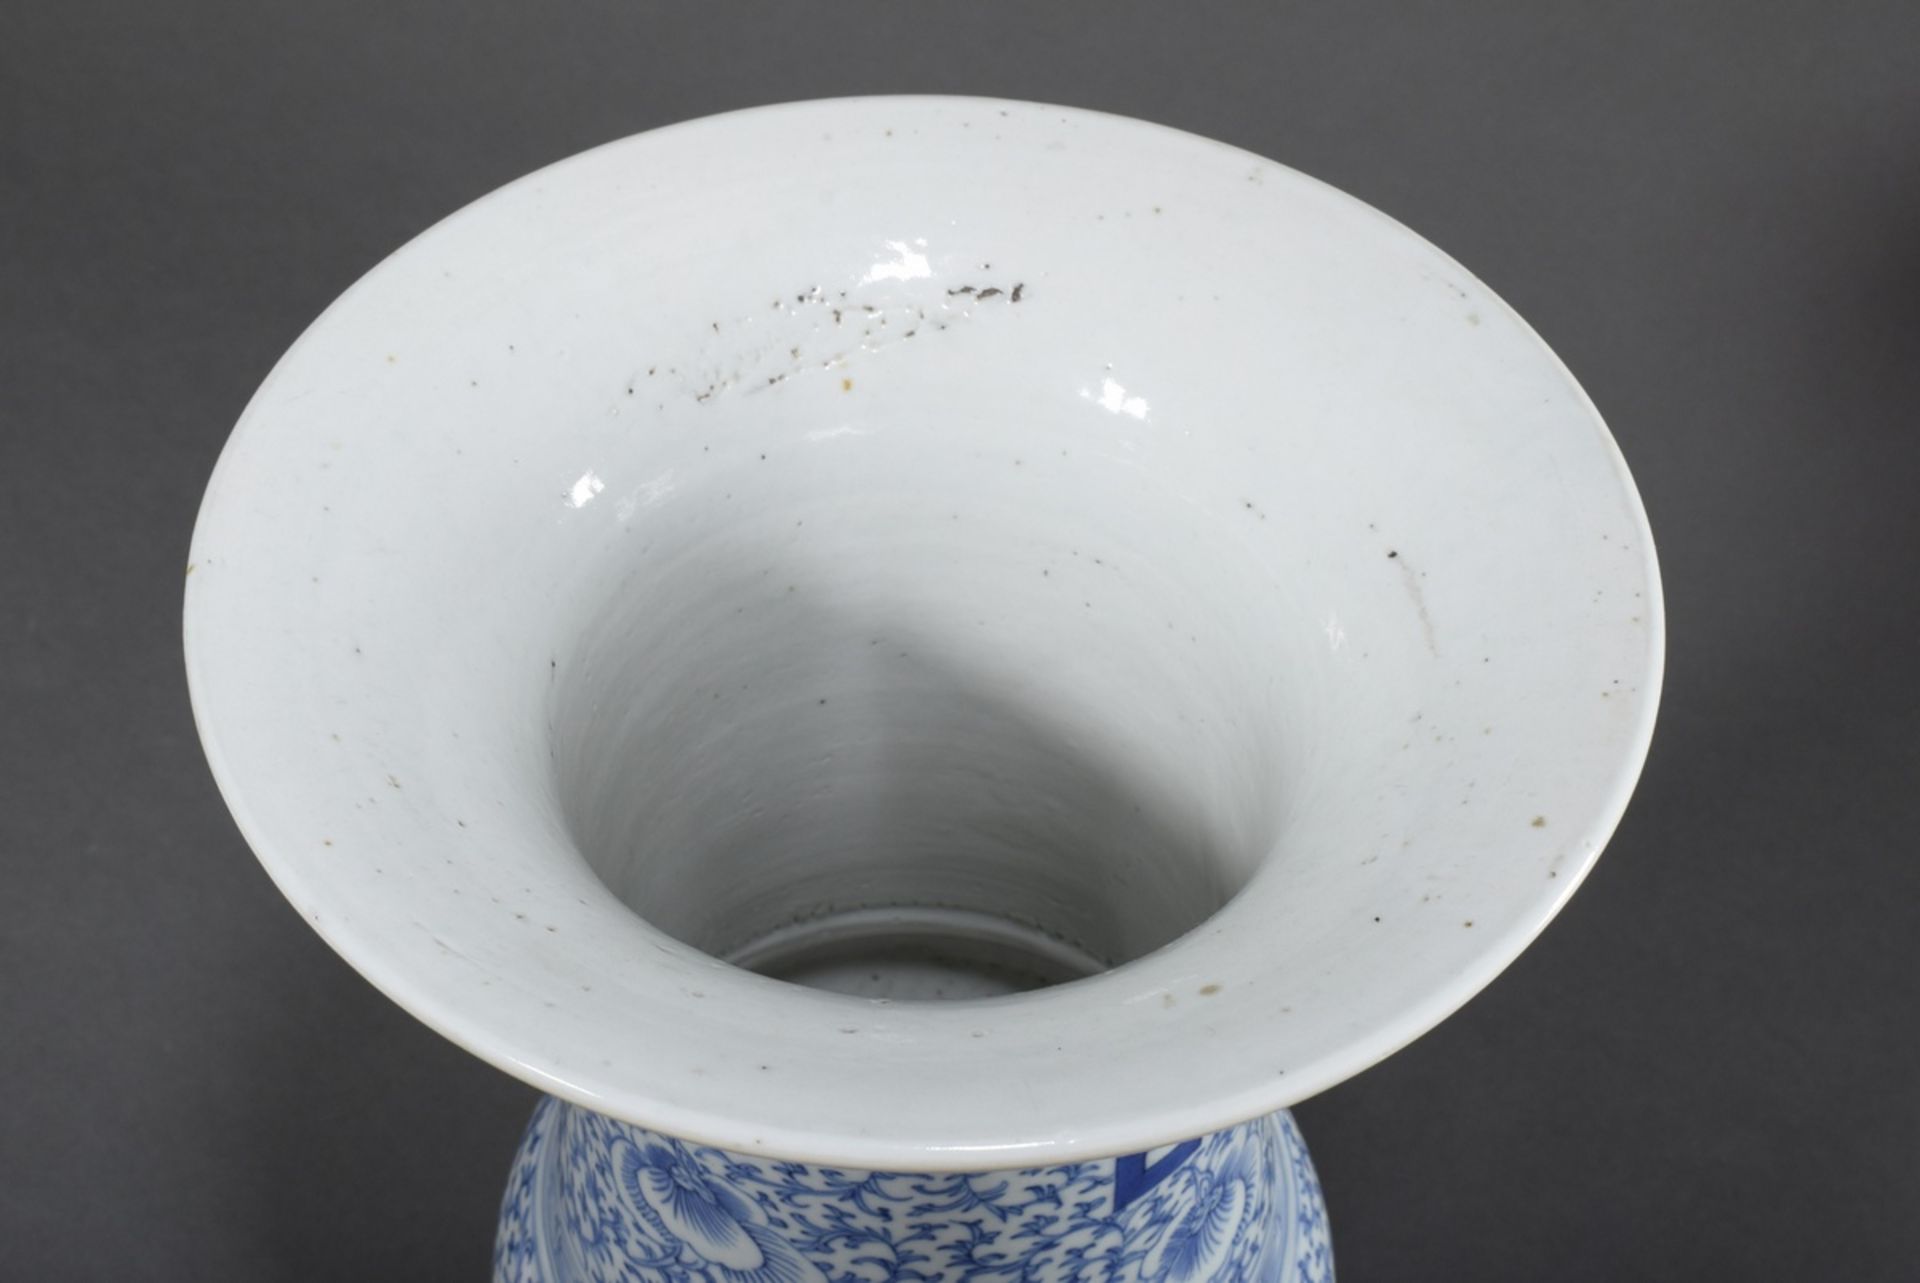 Chinese porcelain "Gu" vase with blue painting "lucky sign" on floral background, h. 41cm, Ø 24cm - Image 2 of 6